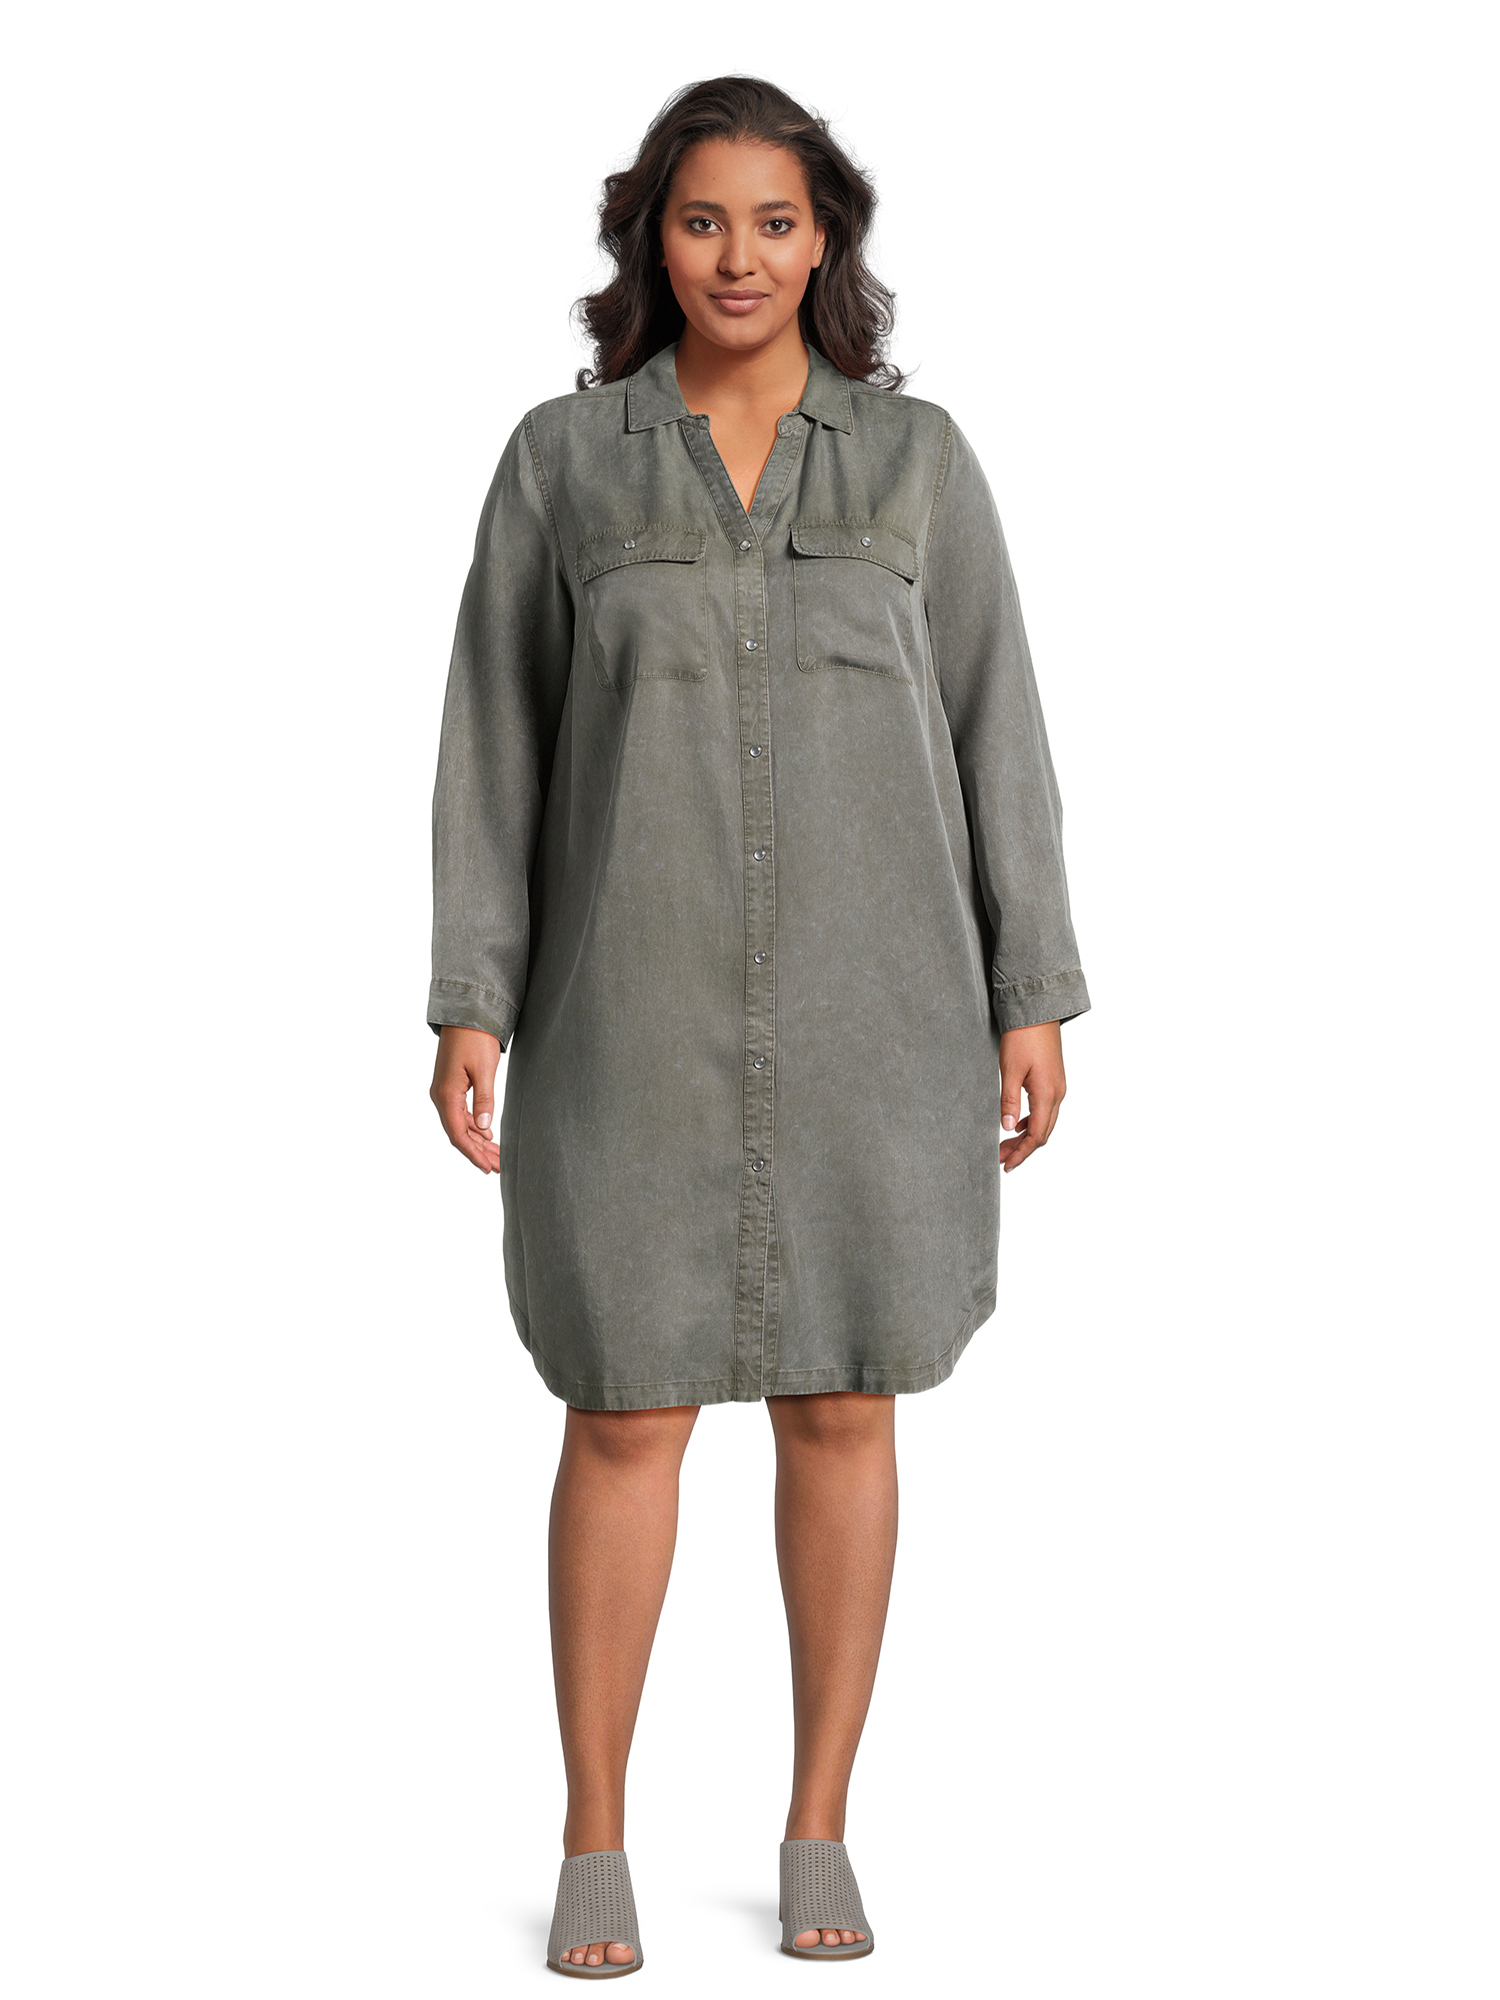 Terra & Sky Womens Plus Size Shirtdress with Long Sleeves